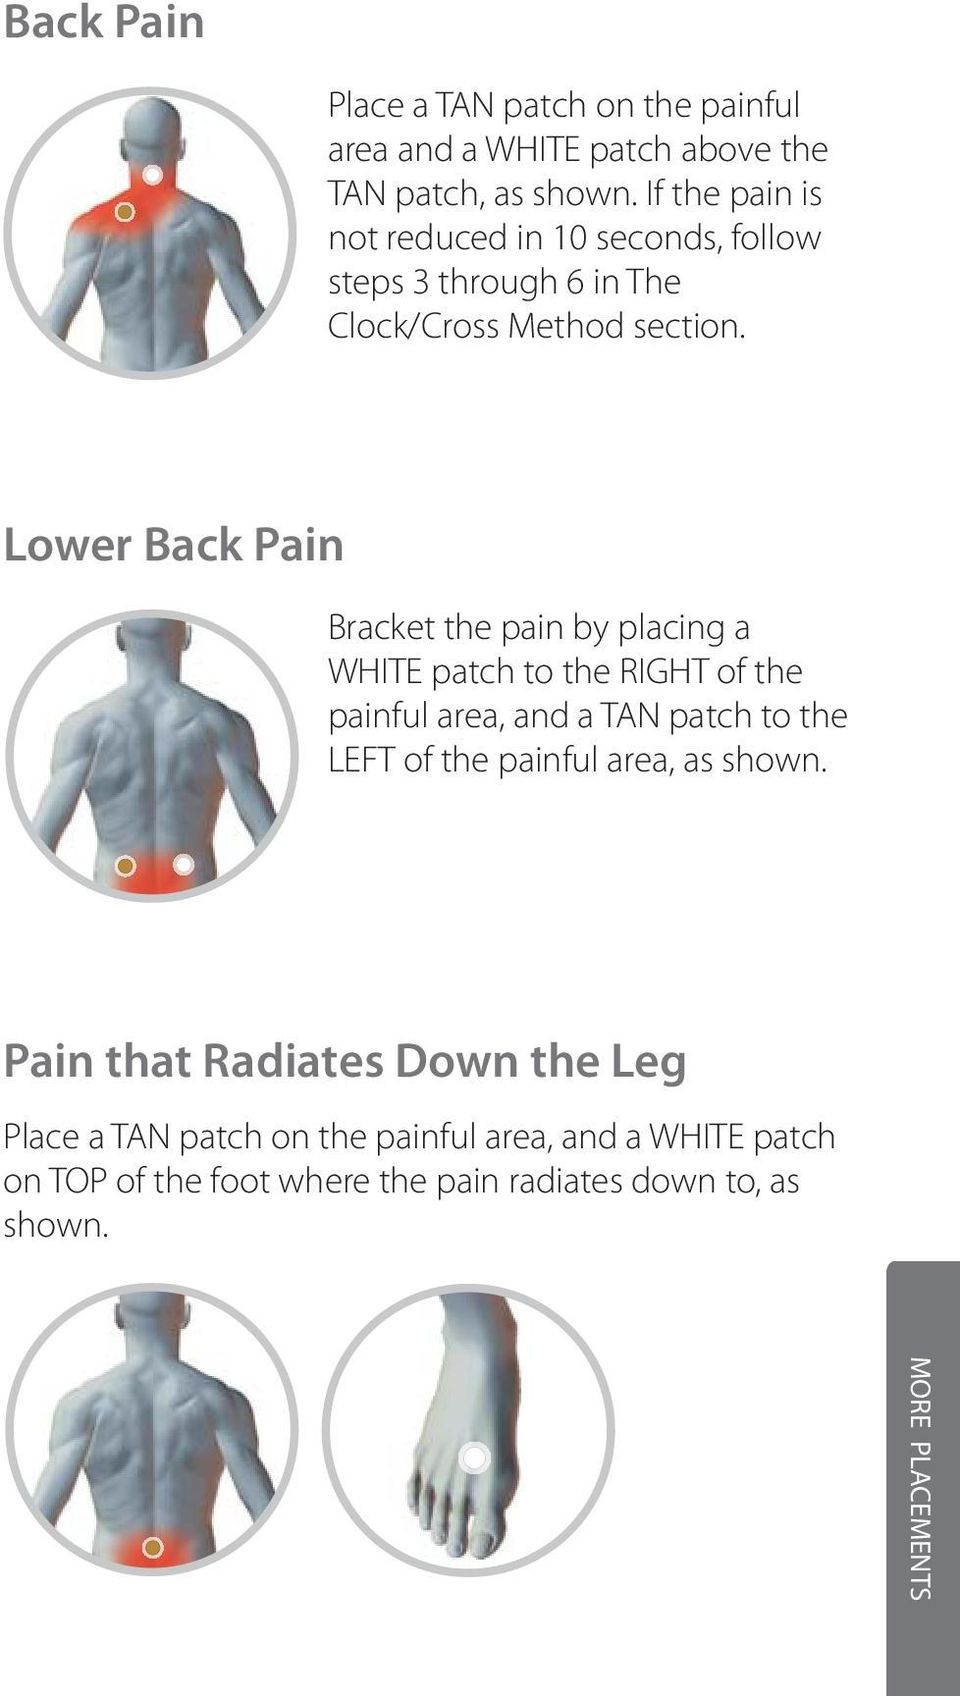 Lower Back Pain Bracket the pain by placing a WHITE patch to the RIGHT of the painful area, and a TAN patch to the LEFT of the